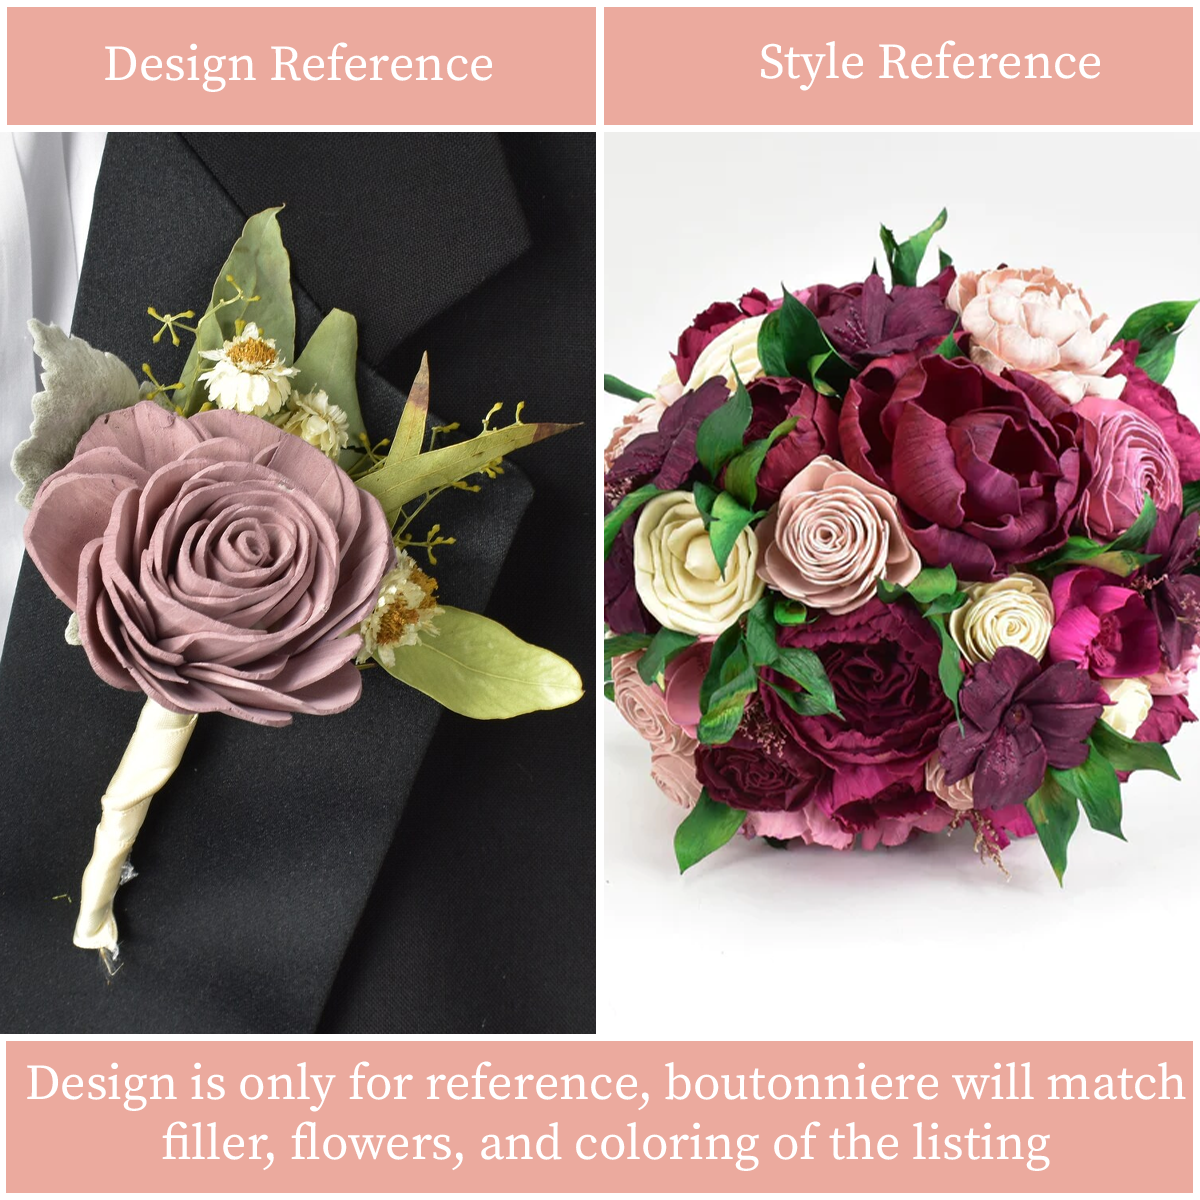 Perfectly Peony Wood Flower Bouquet Collection